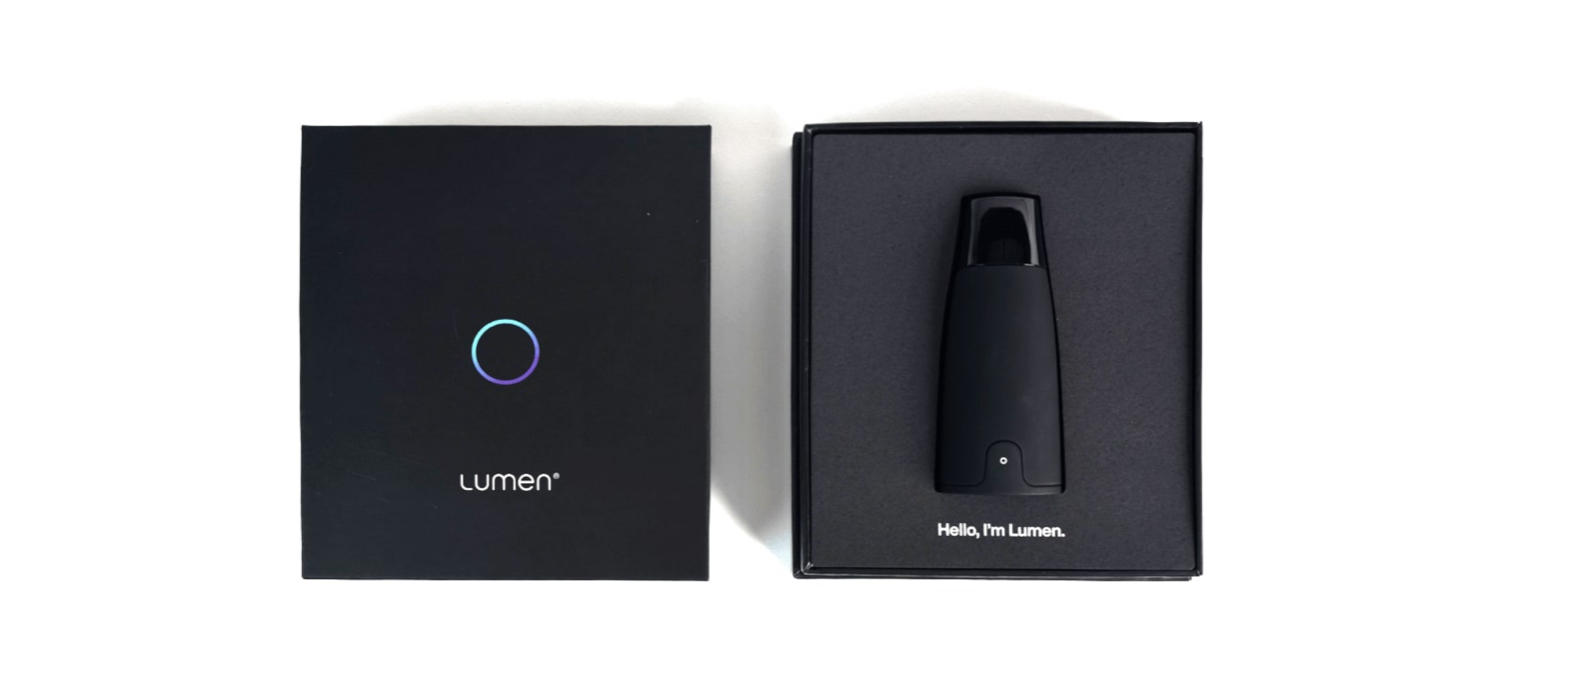 Ever thought of tracking your metabolism? Let's talk Lumen - TechTalks